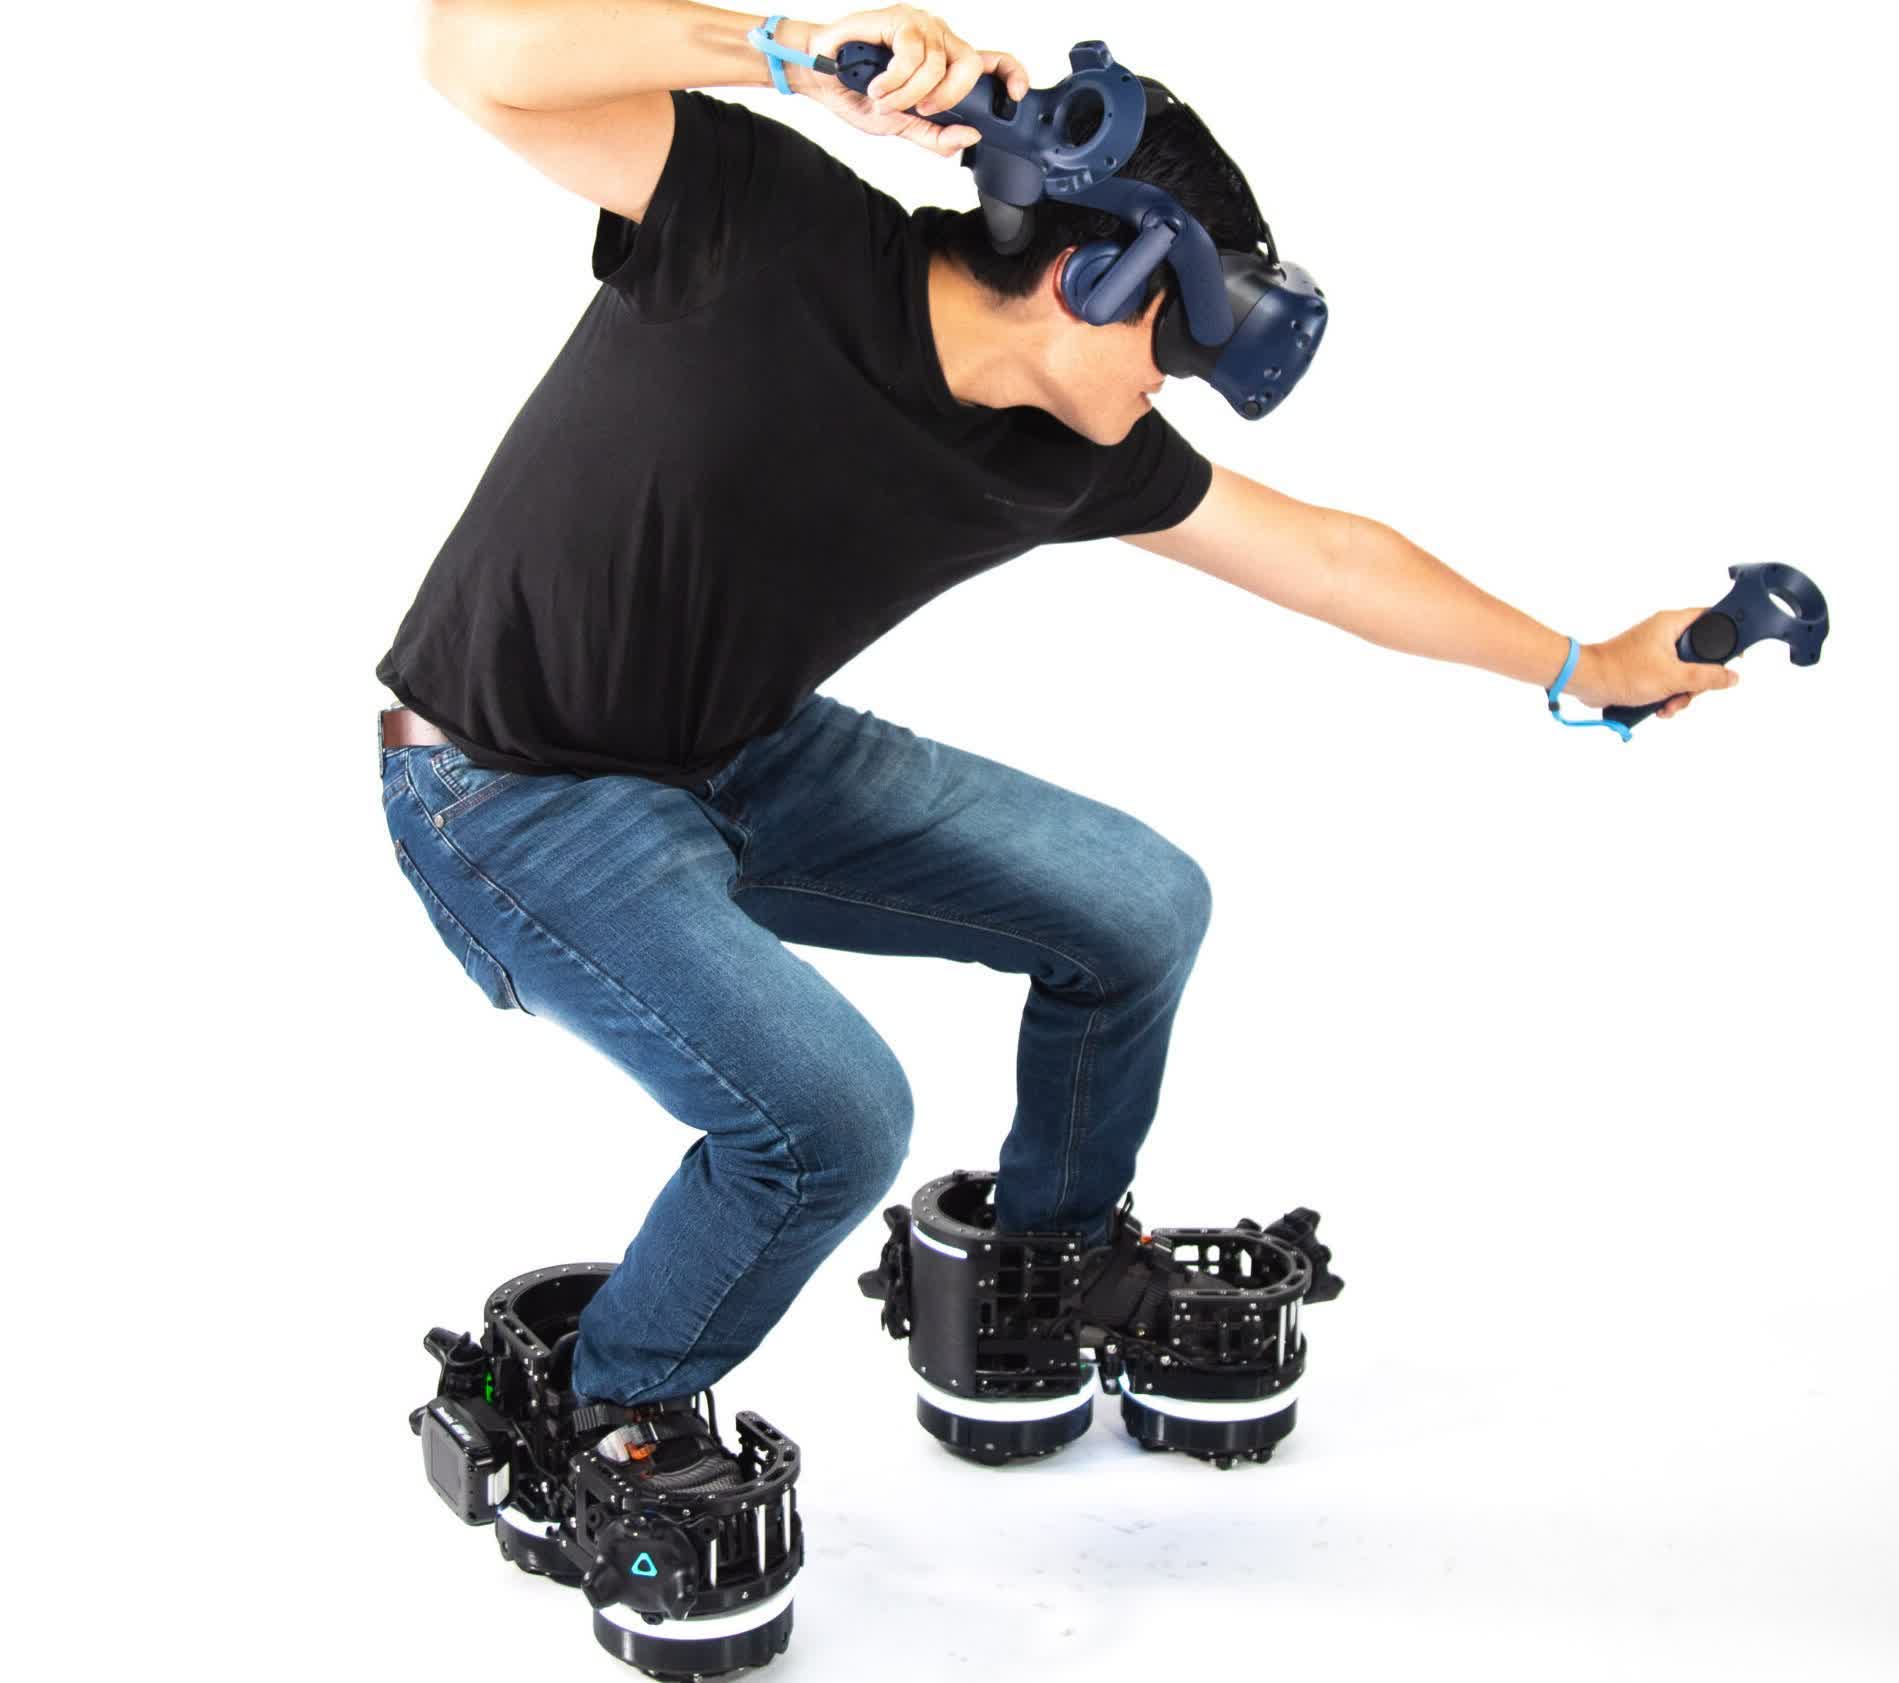 Robotic VR boots let you walk without moving forward